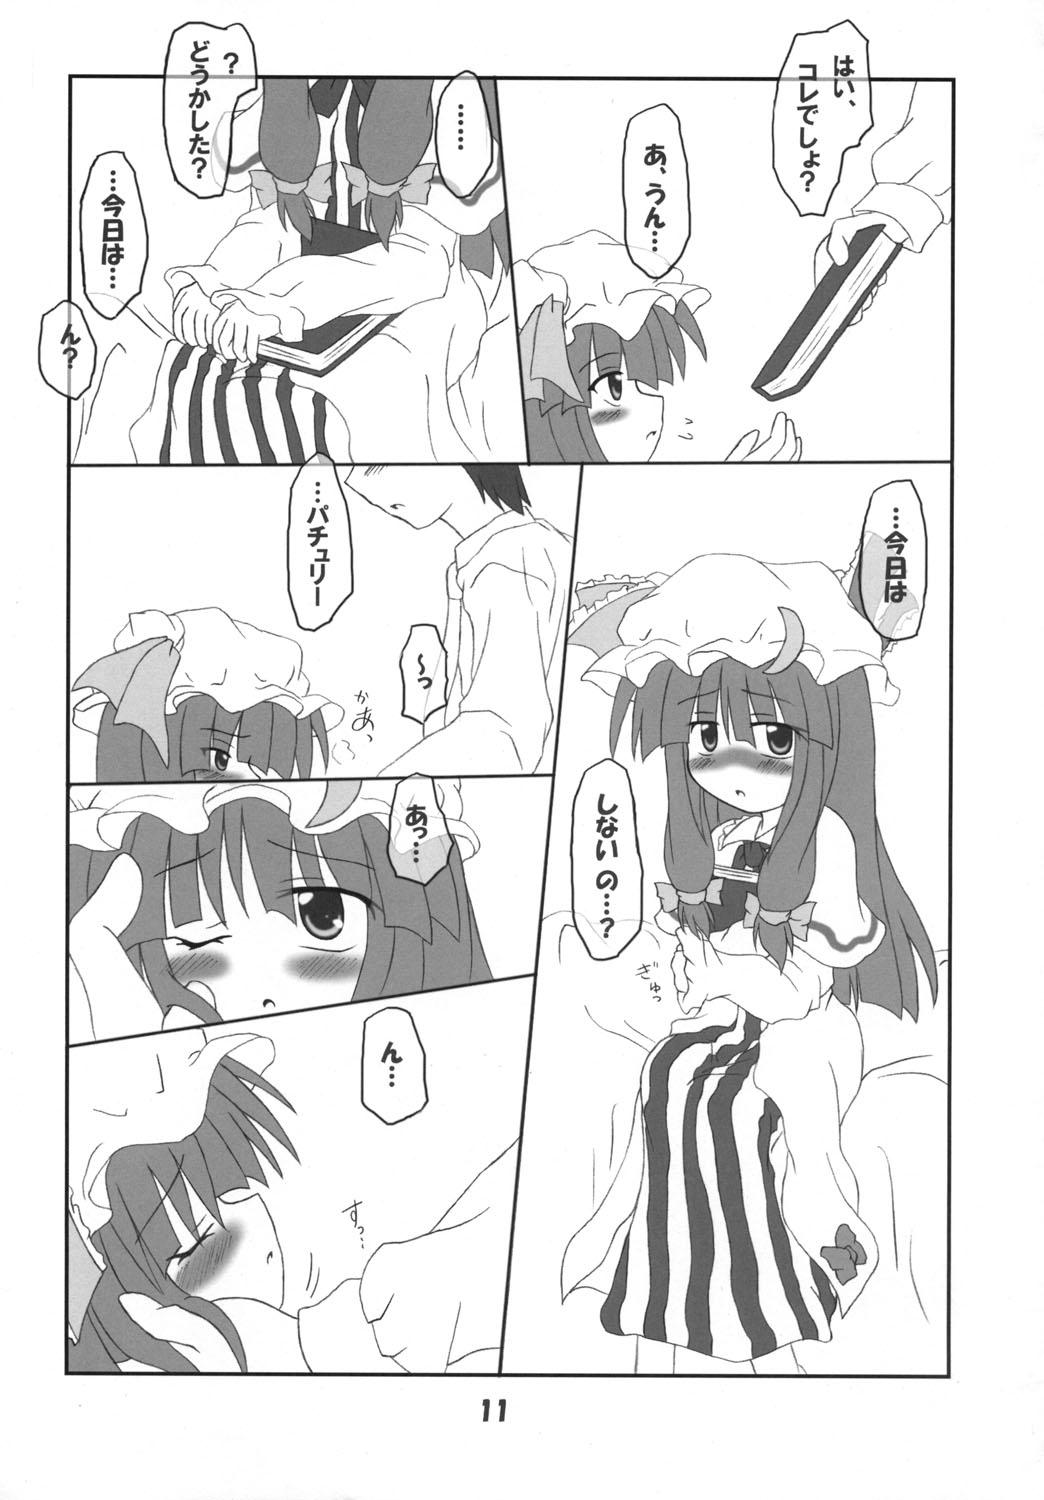 Big Dick Rollin 18 - Touhou project Insane Porn - Page 10